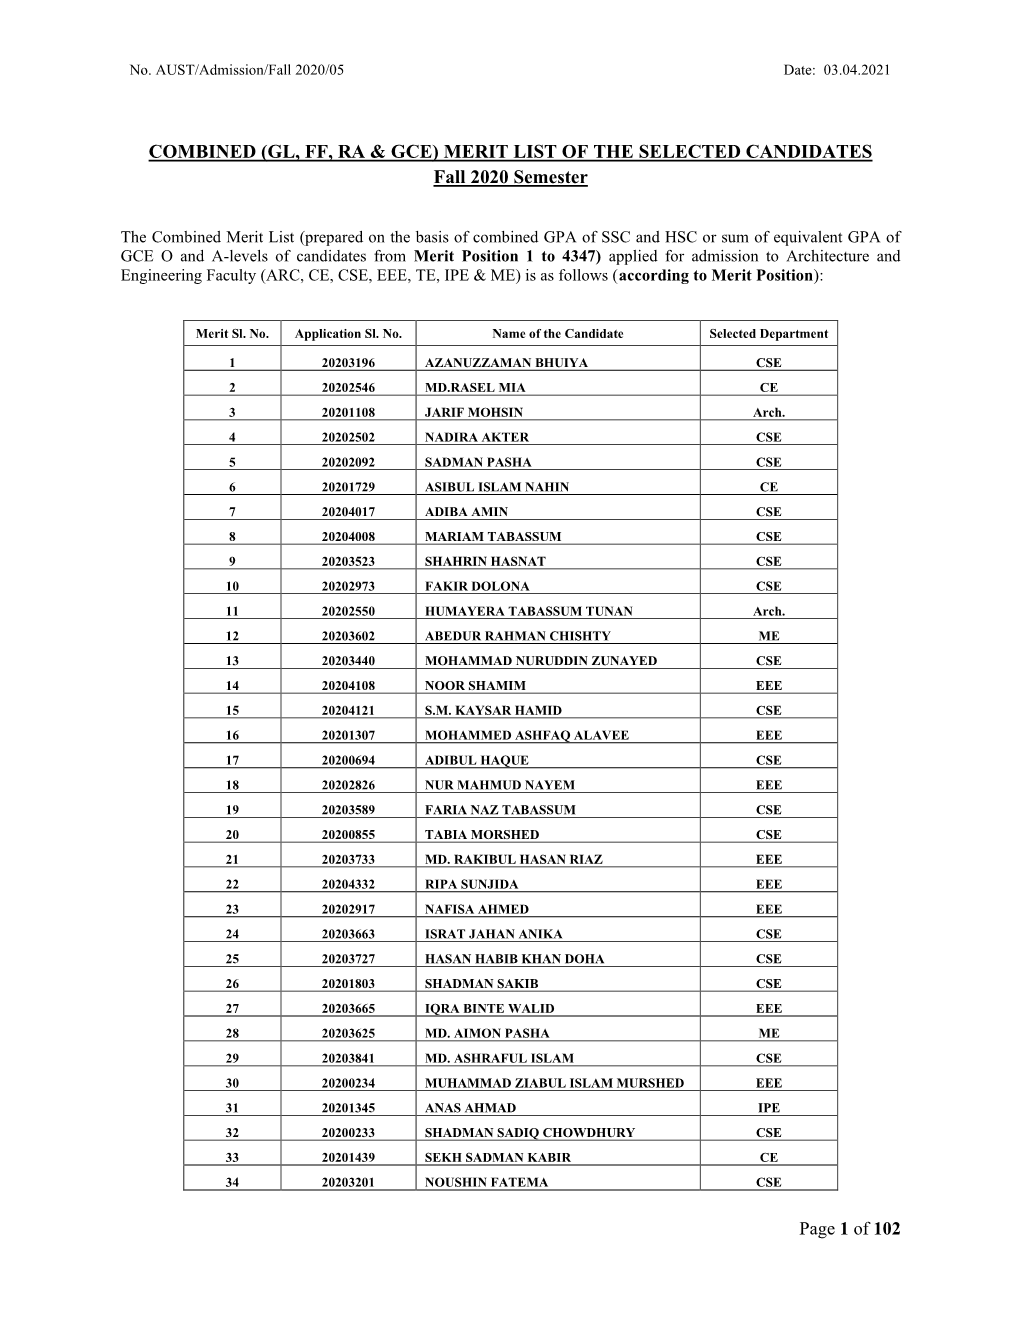 MERIT LIST of the SELECTED CANDIDATES Fall 2020 Semester